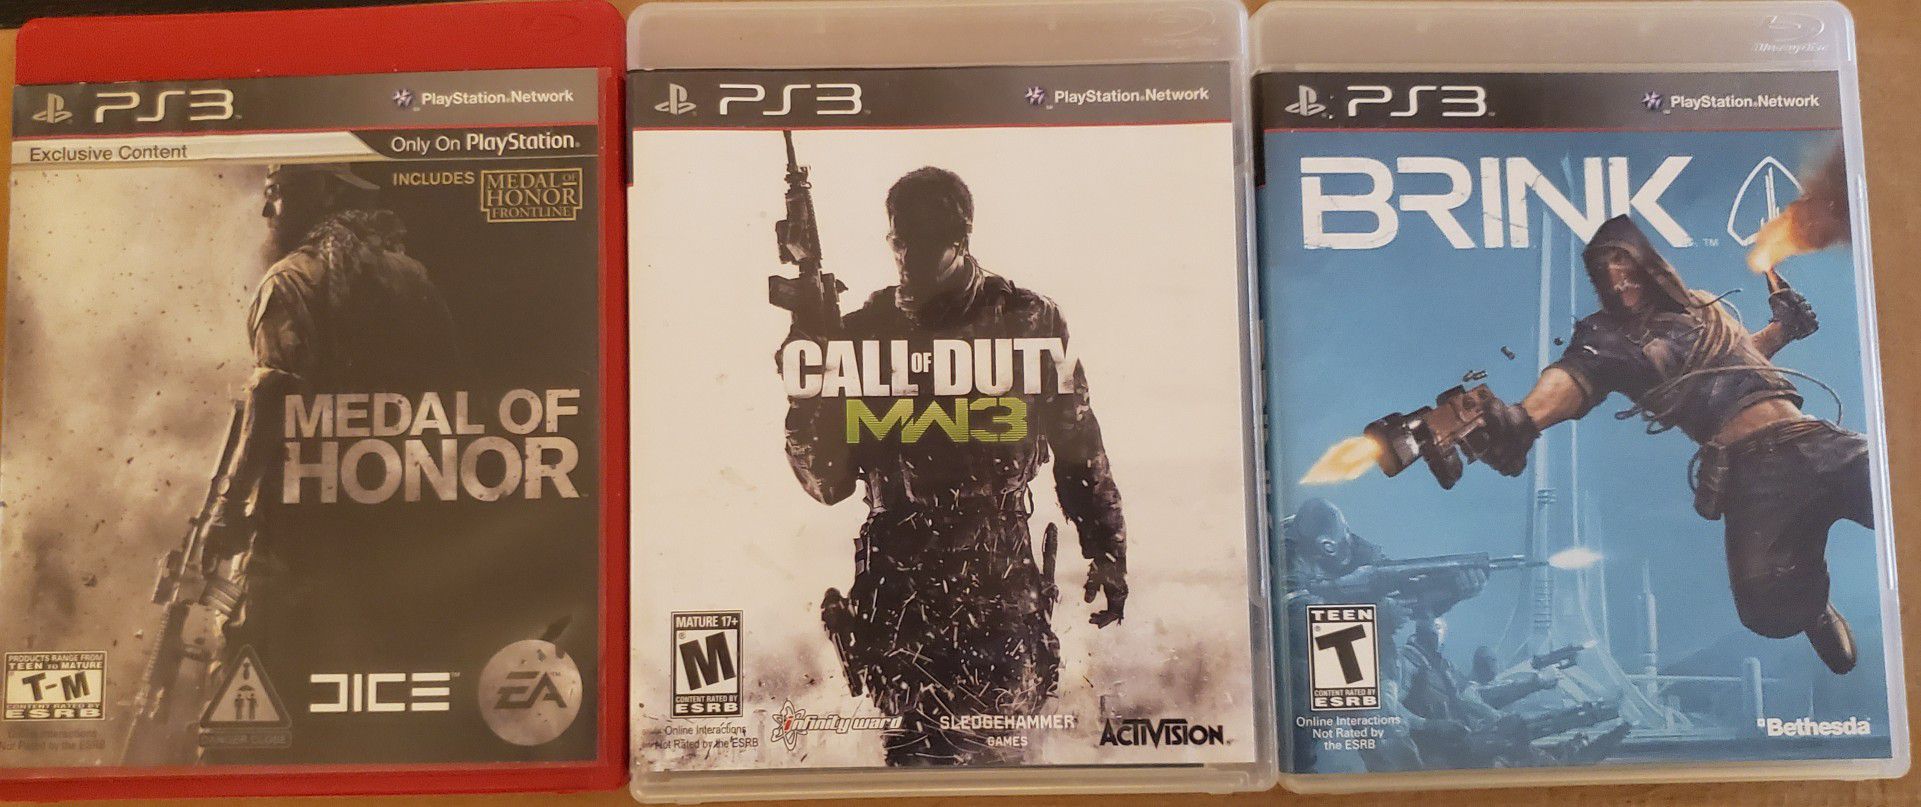 3 game set for your PS3!